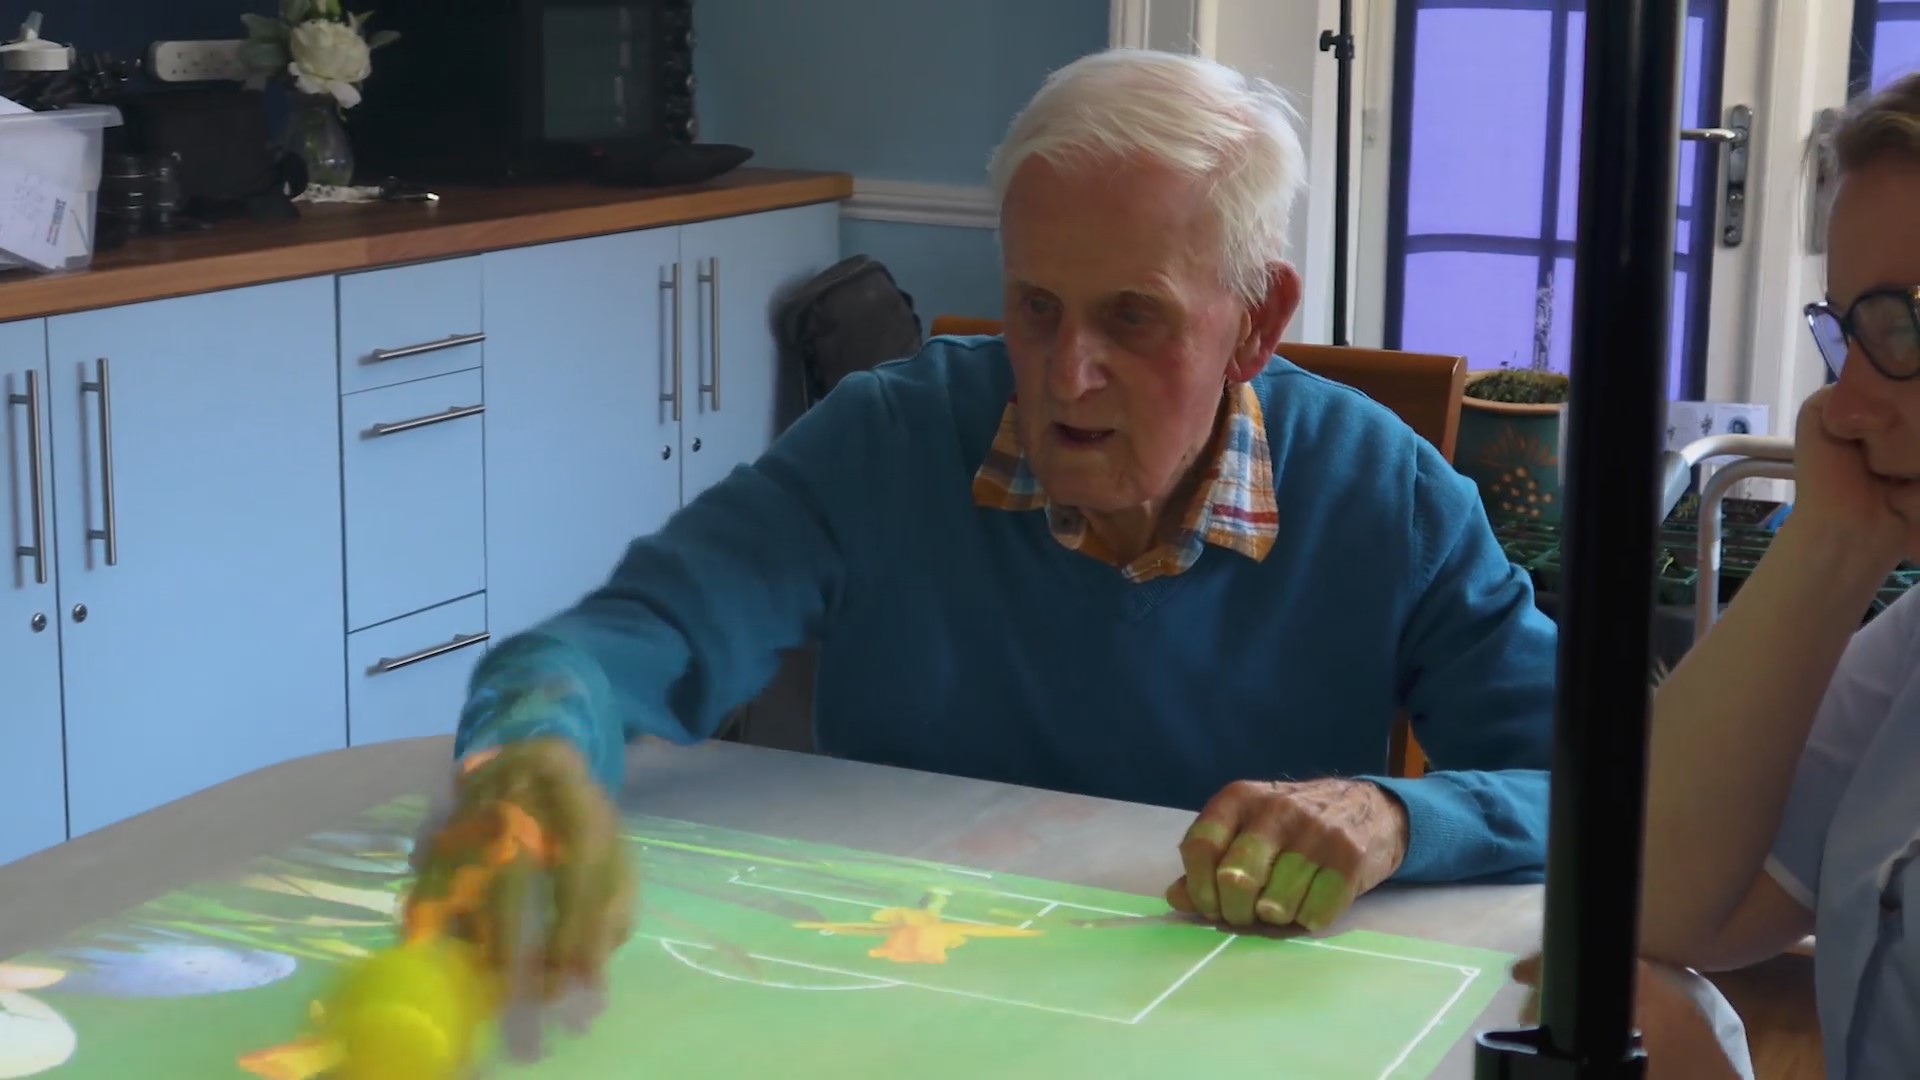 Care home resident improving their wellbeing by engaging in tennis using the Wellbeing suite interactive projector. Demonstrating creativity and self-expression. A clear indication of improvements in Social interaction, Emotional well-being, and cognitive stimulation